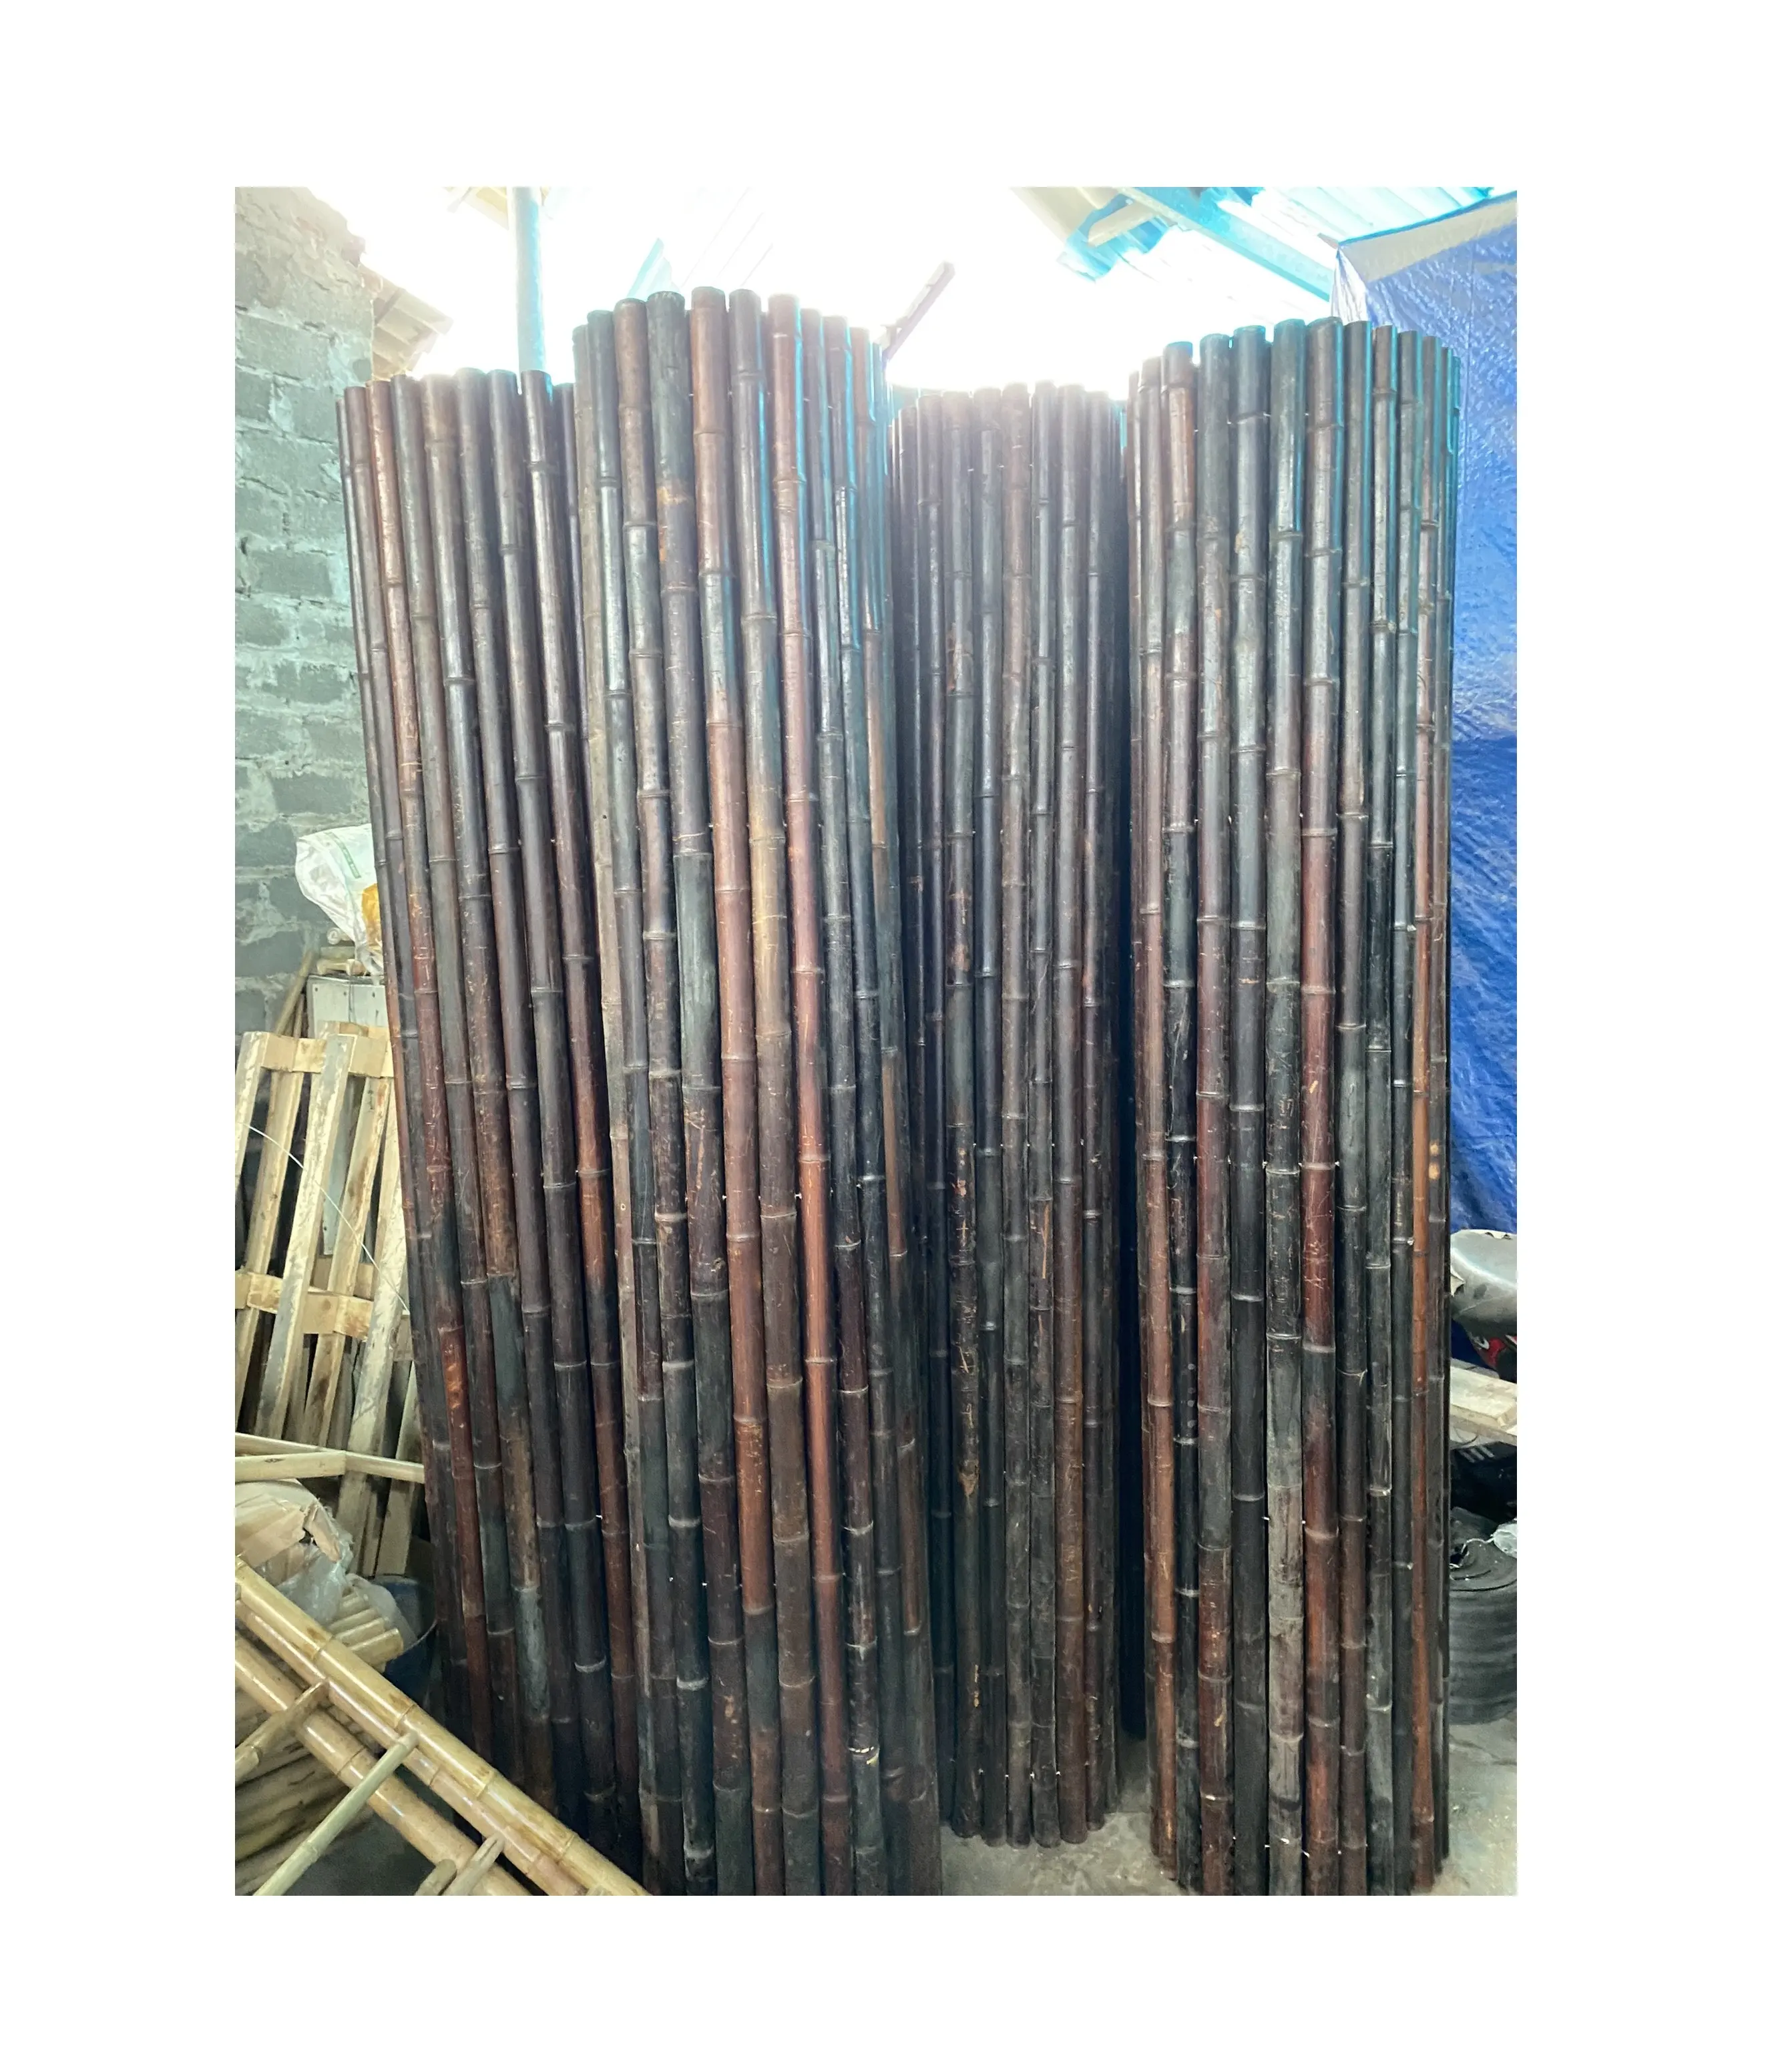 Cheap Brown Bamboo Fence Sold in 8 foot lengths/ Natural bamboo pole cane fencing garden home ( whatsapp 0084587176063 Sandy)